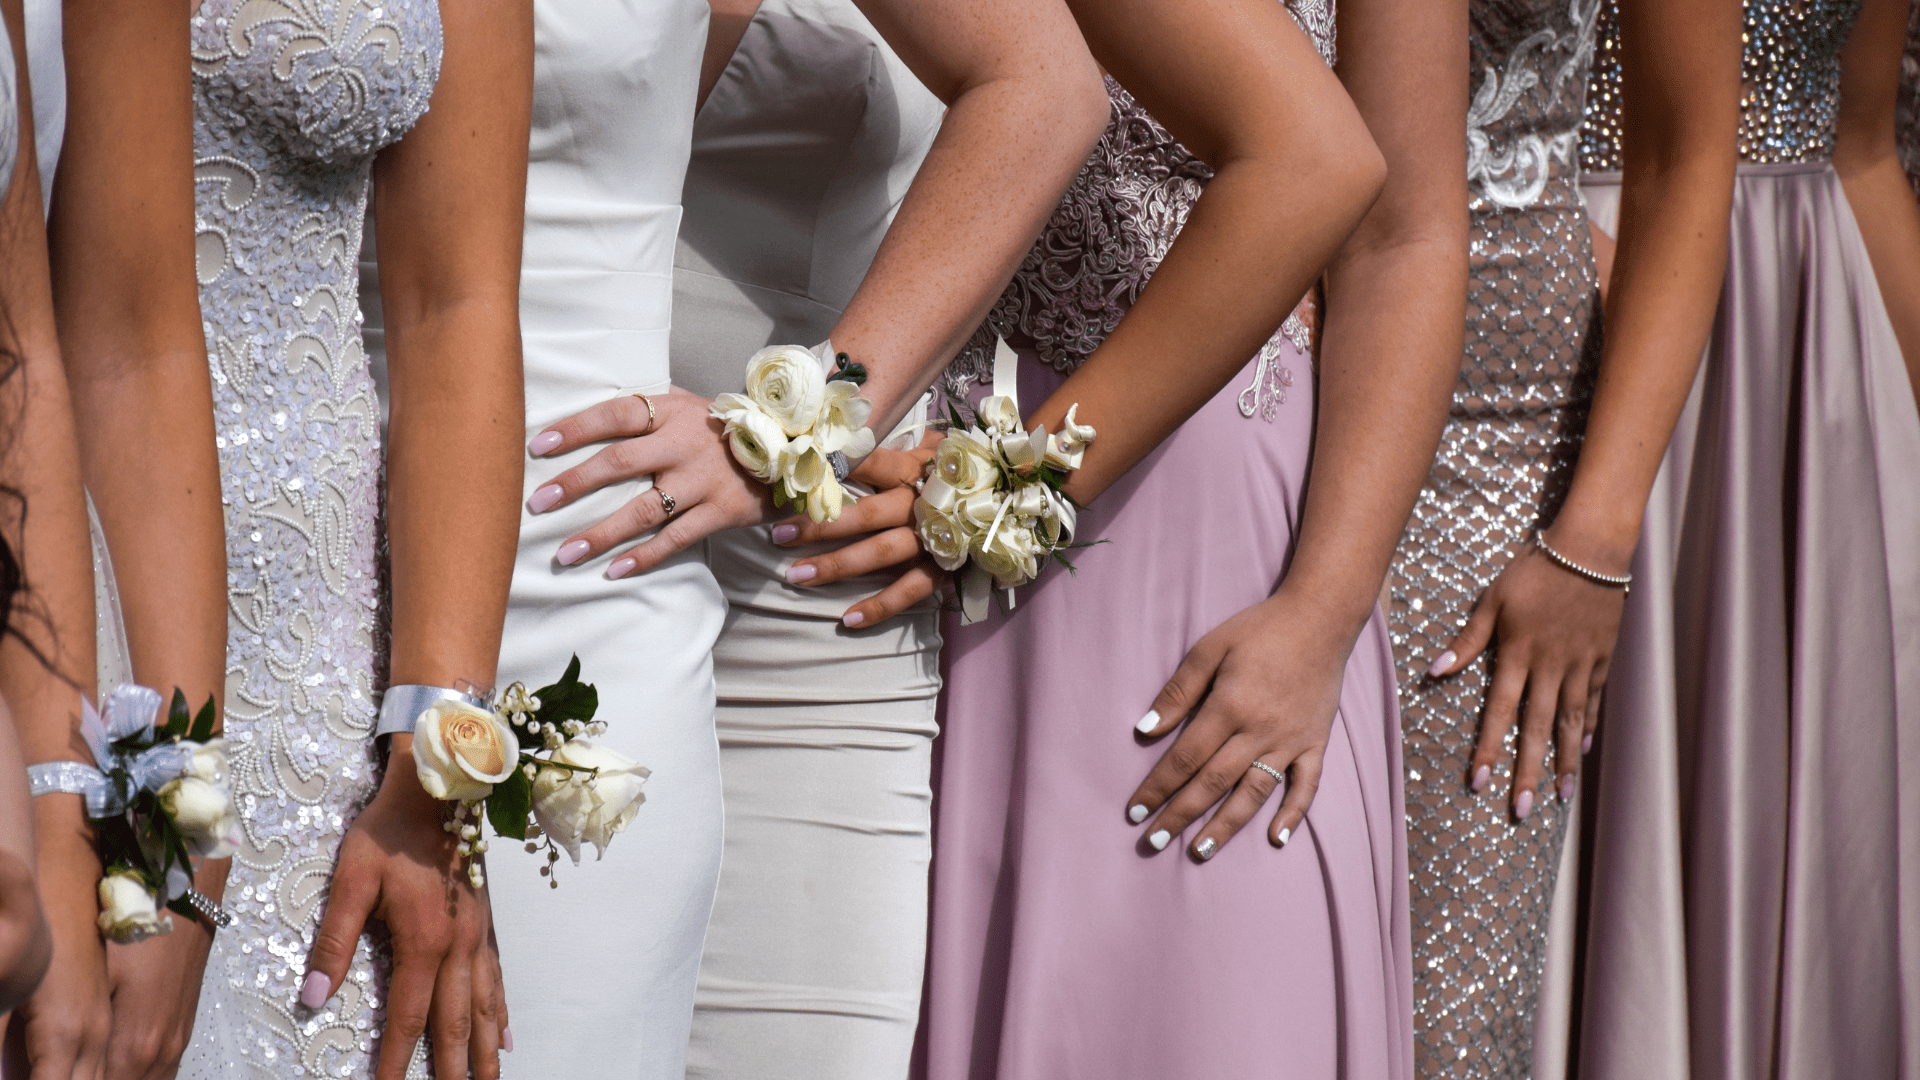 Enhance Your Prom or Wedding with Red Carpet Event Accessories